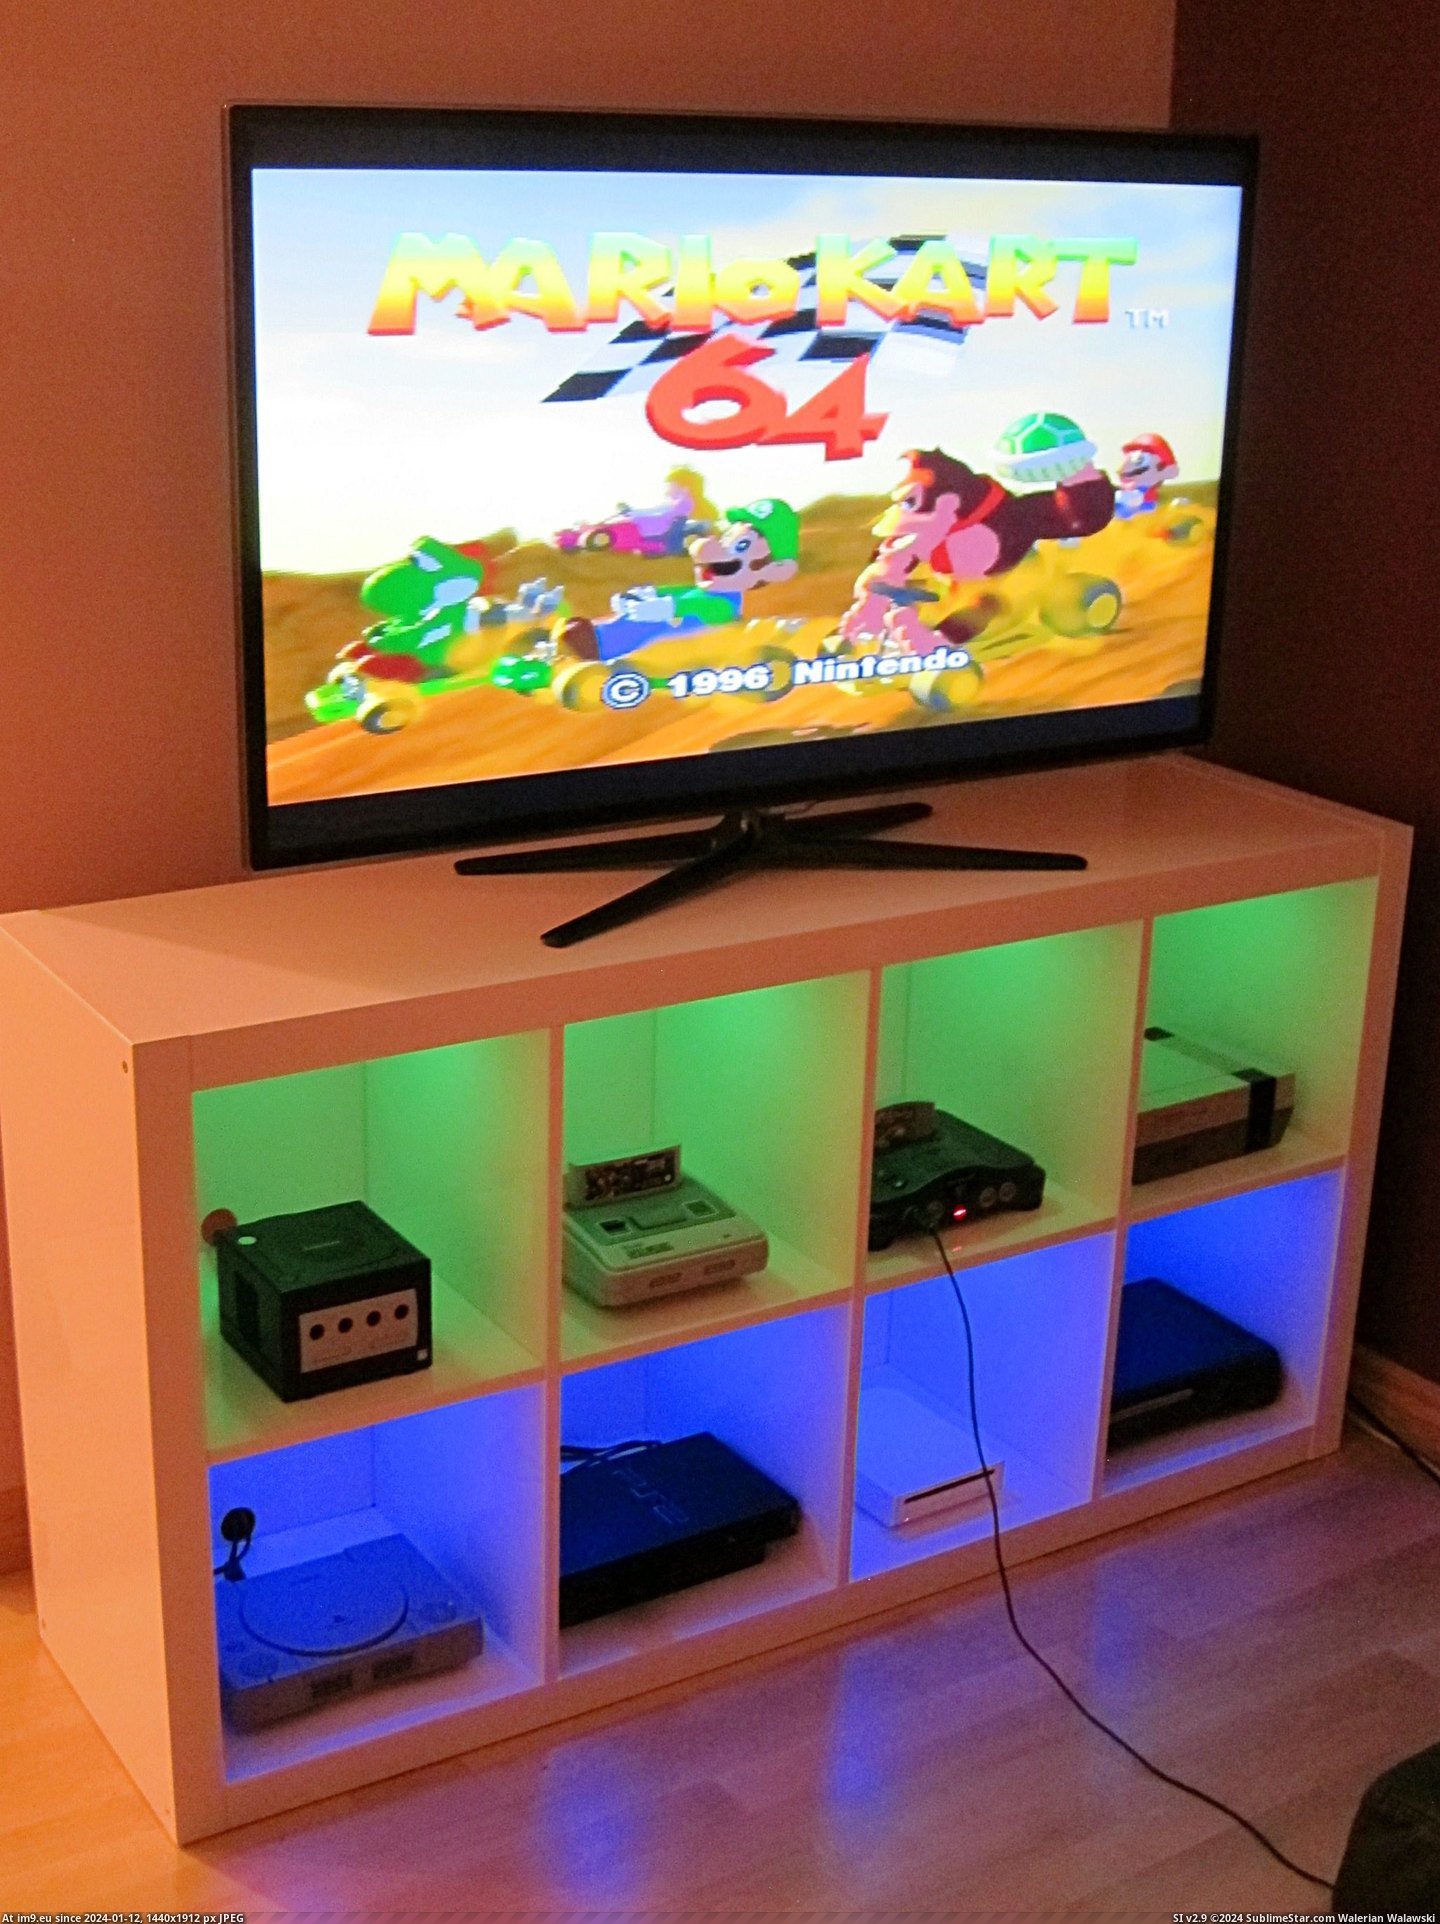 #Gaming #Happy #Finished #Product #Ikea #Bookshelf #Cabinet #Console #Modified [Gaming] I modified an Ikea bookshelf to make a console cabinet. Very happy with the finished product! Pic. (Image of album My r/GAMING favs))